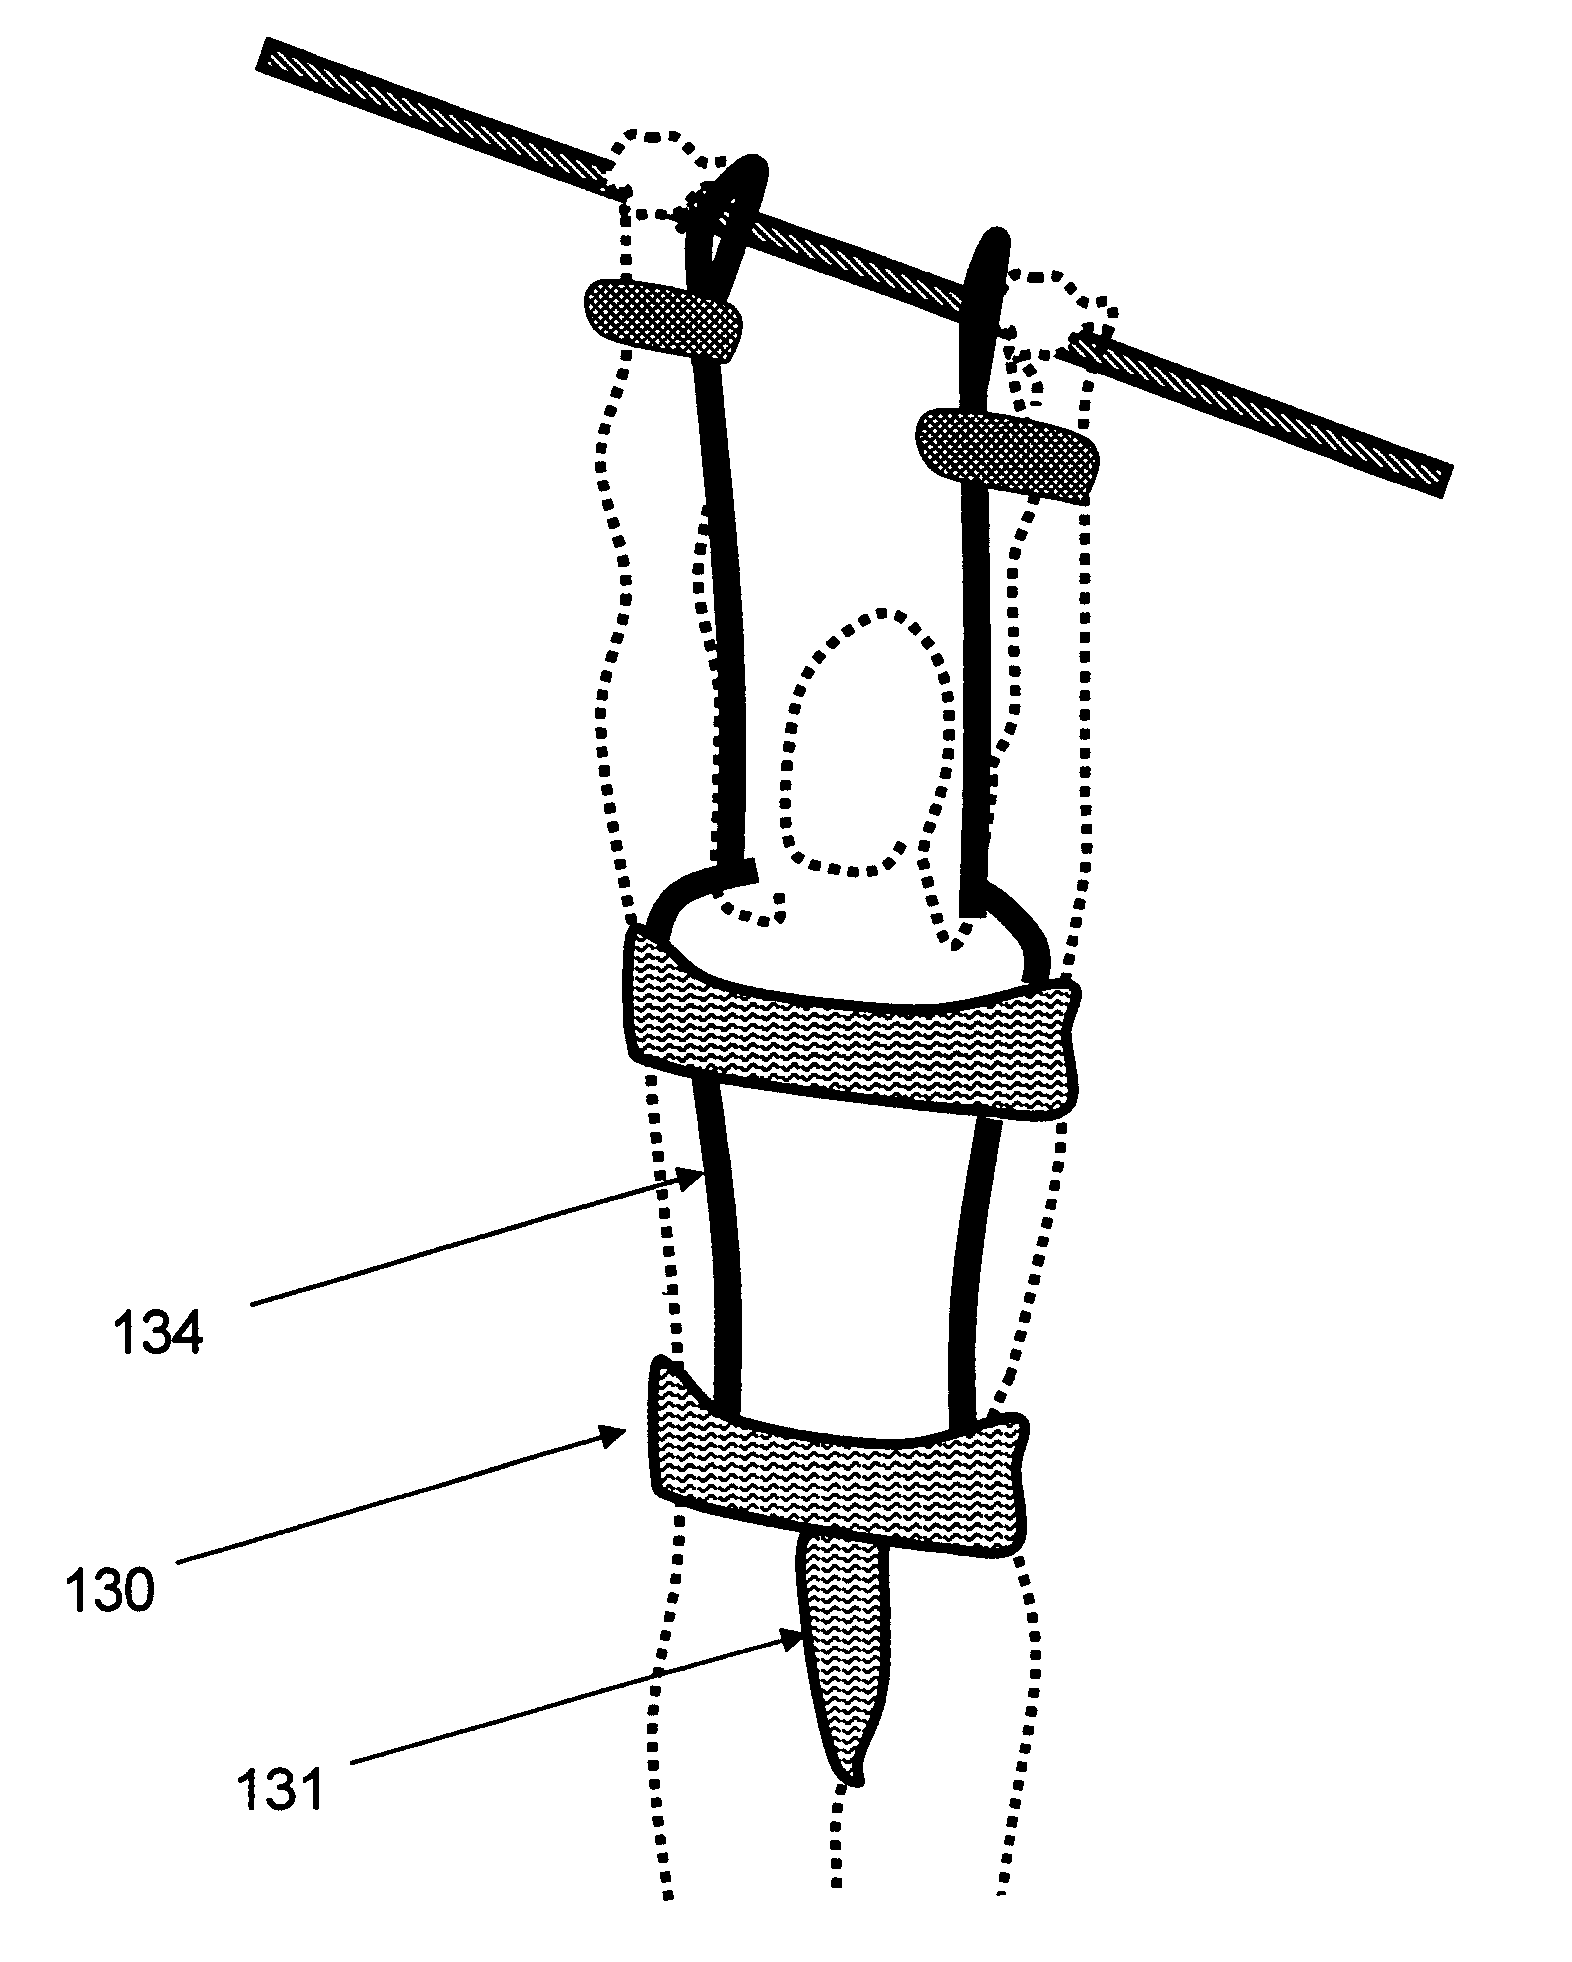 Gymnastics safety and training aid harness for high bar and other apparatus